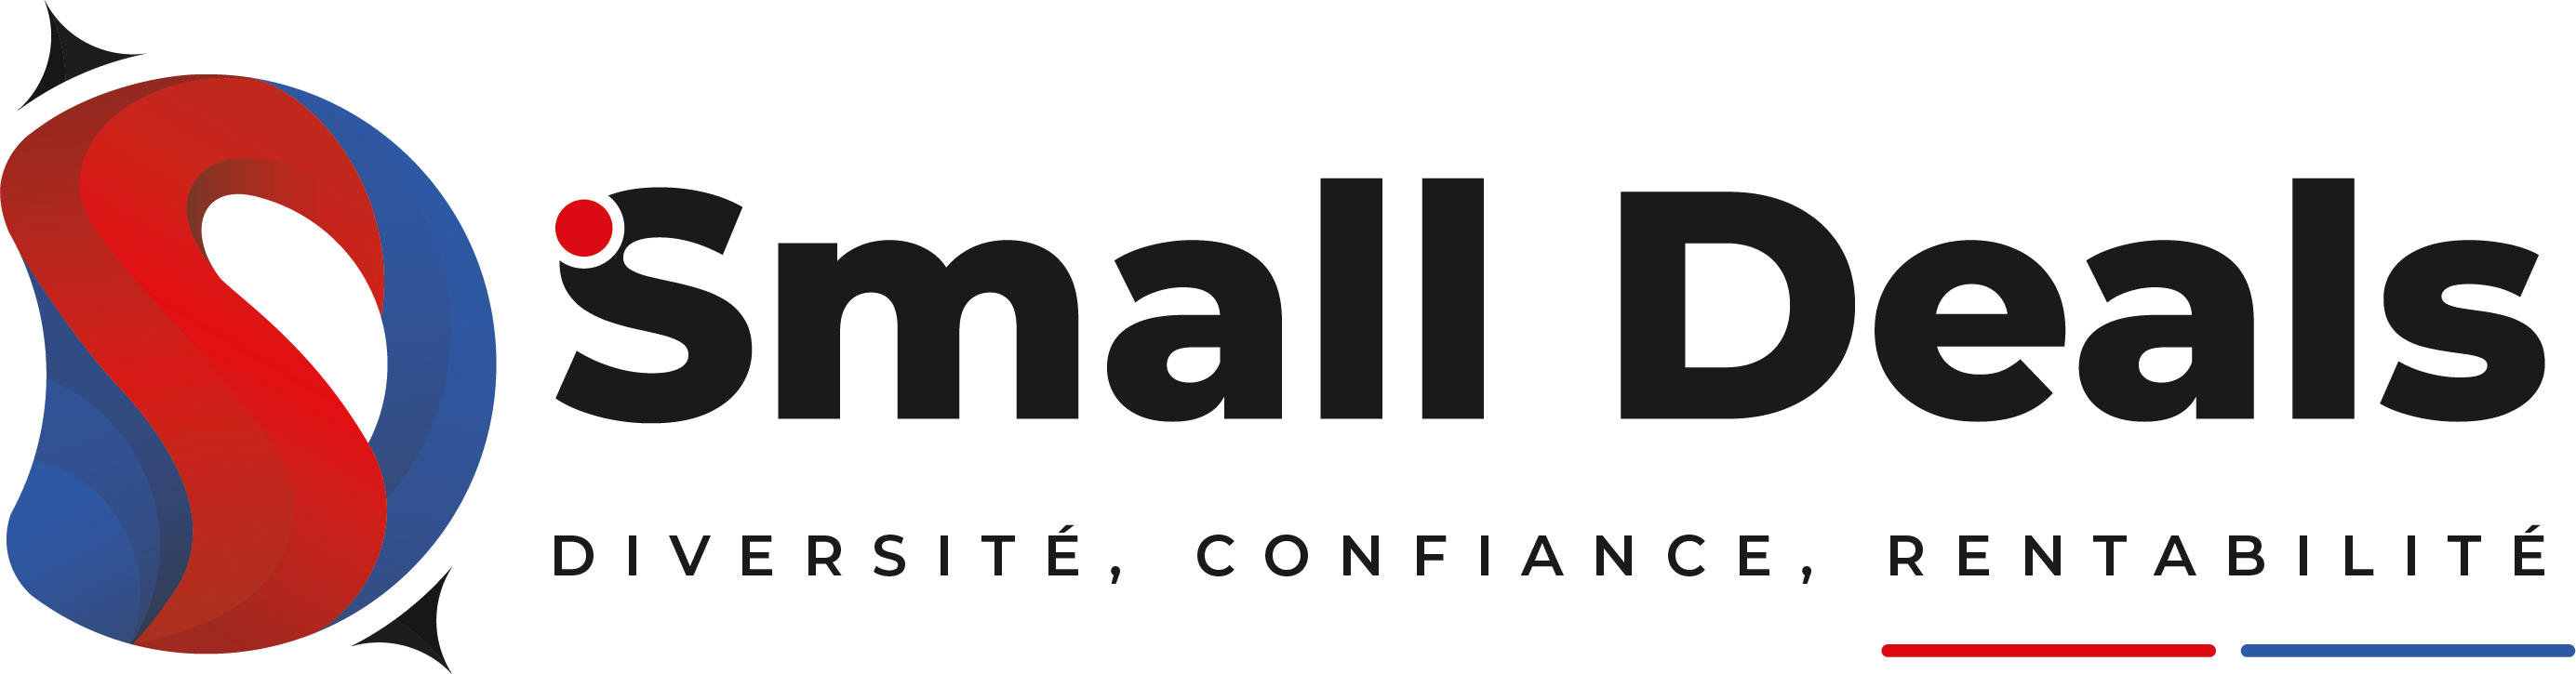 Small Deals, your crypto friendly e-commerce marketplace